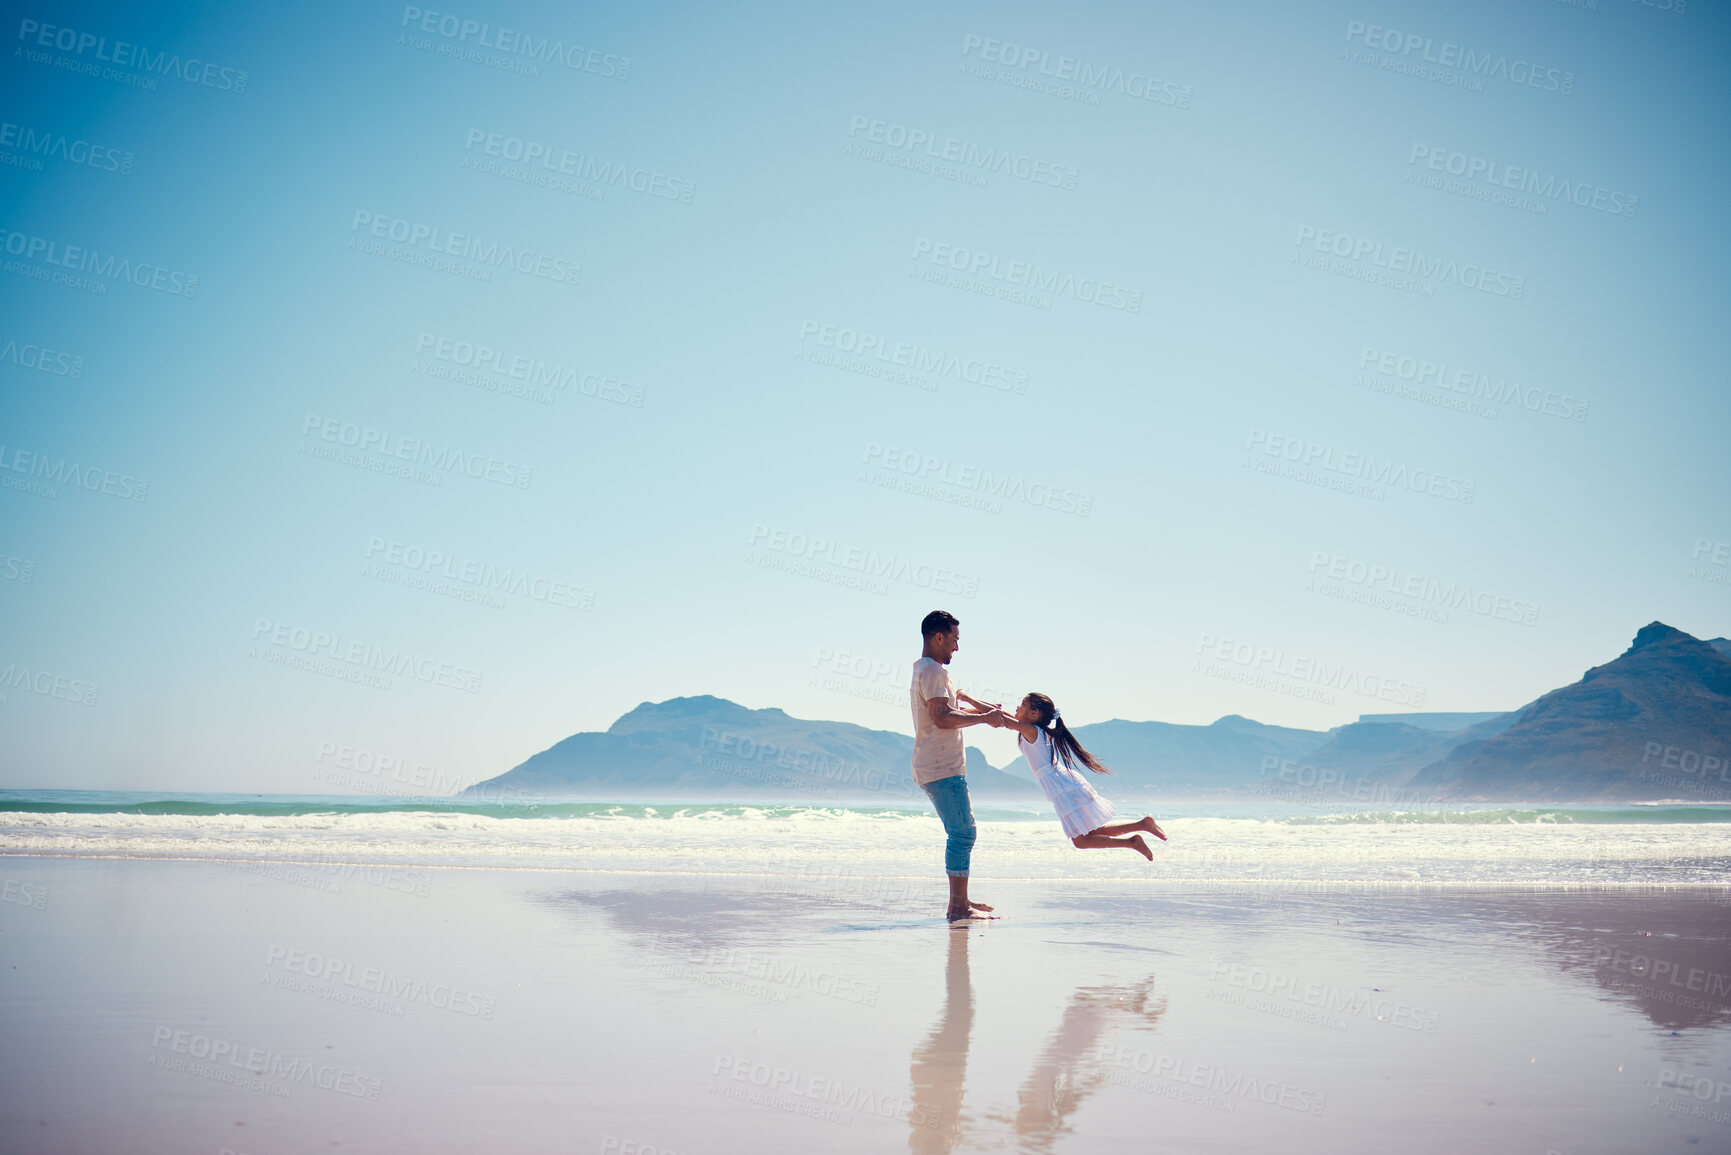 Buy stock photo Mockup, father and daughter playing on the beach together during summer vacation or holiday by the ocean. Sky, sea or view with a man and female child swinging while bonding on the sand at the sea